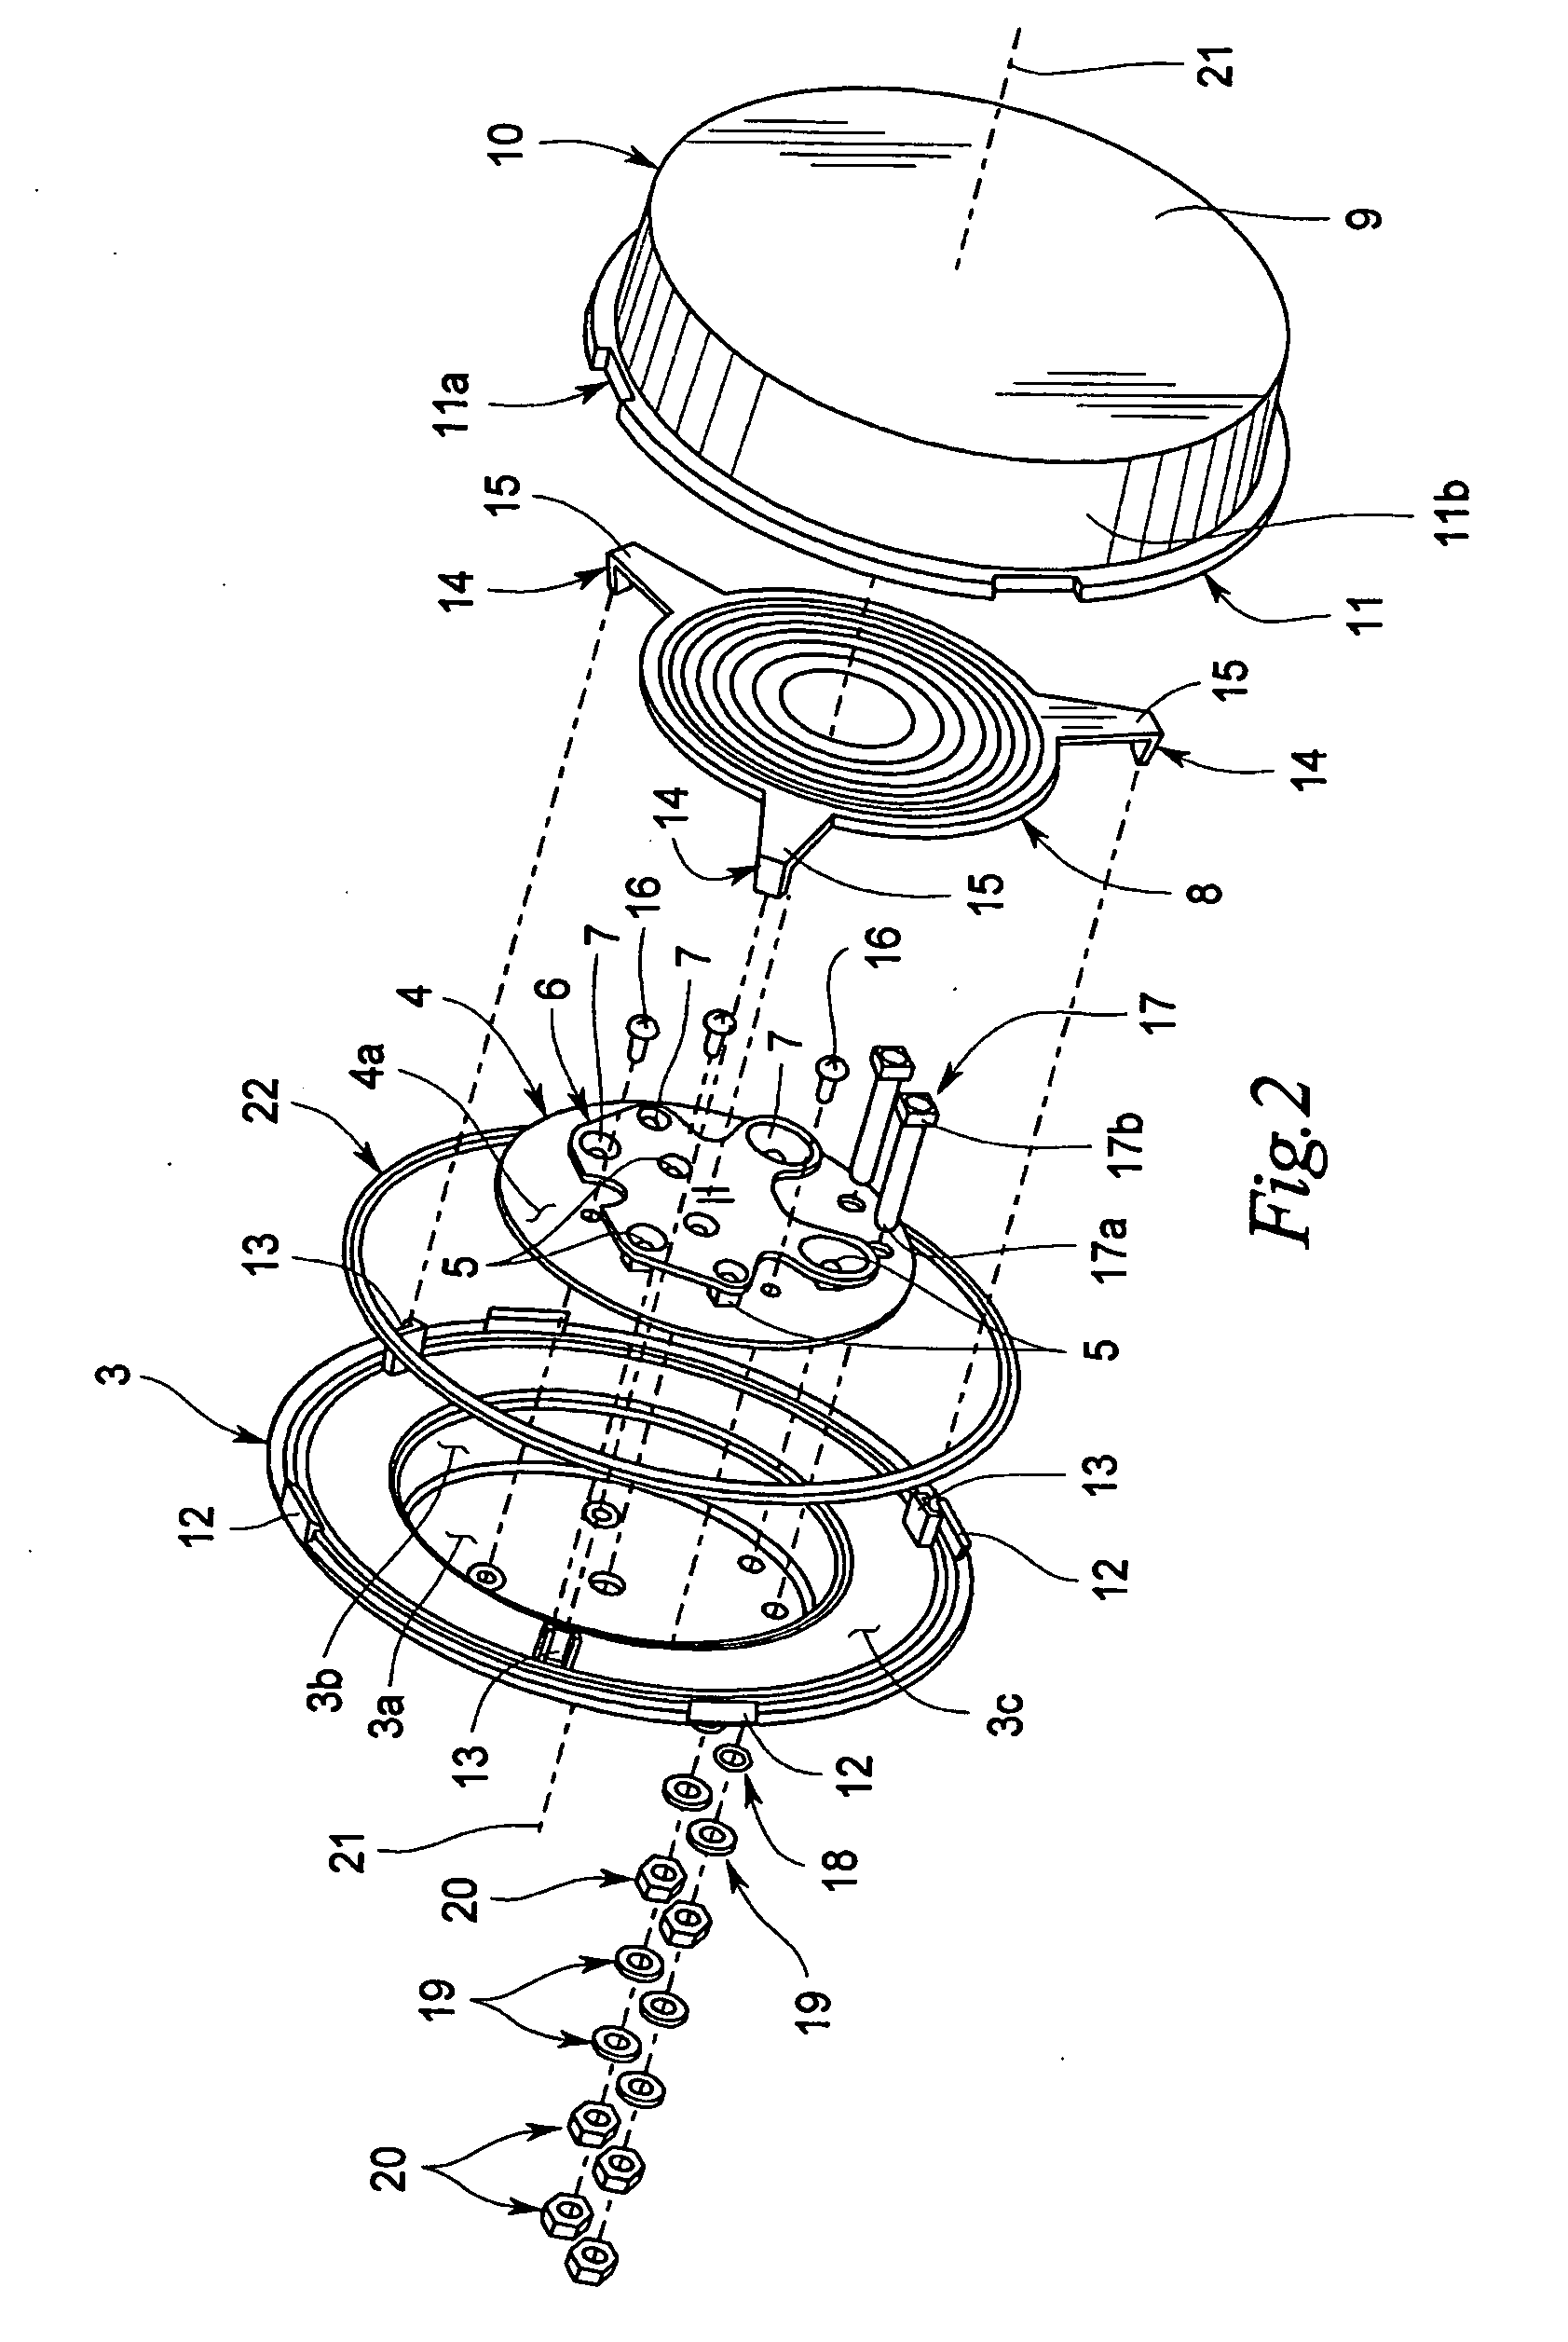 Light emitting diode signaling device and method of providing an indication using the same